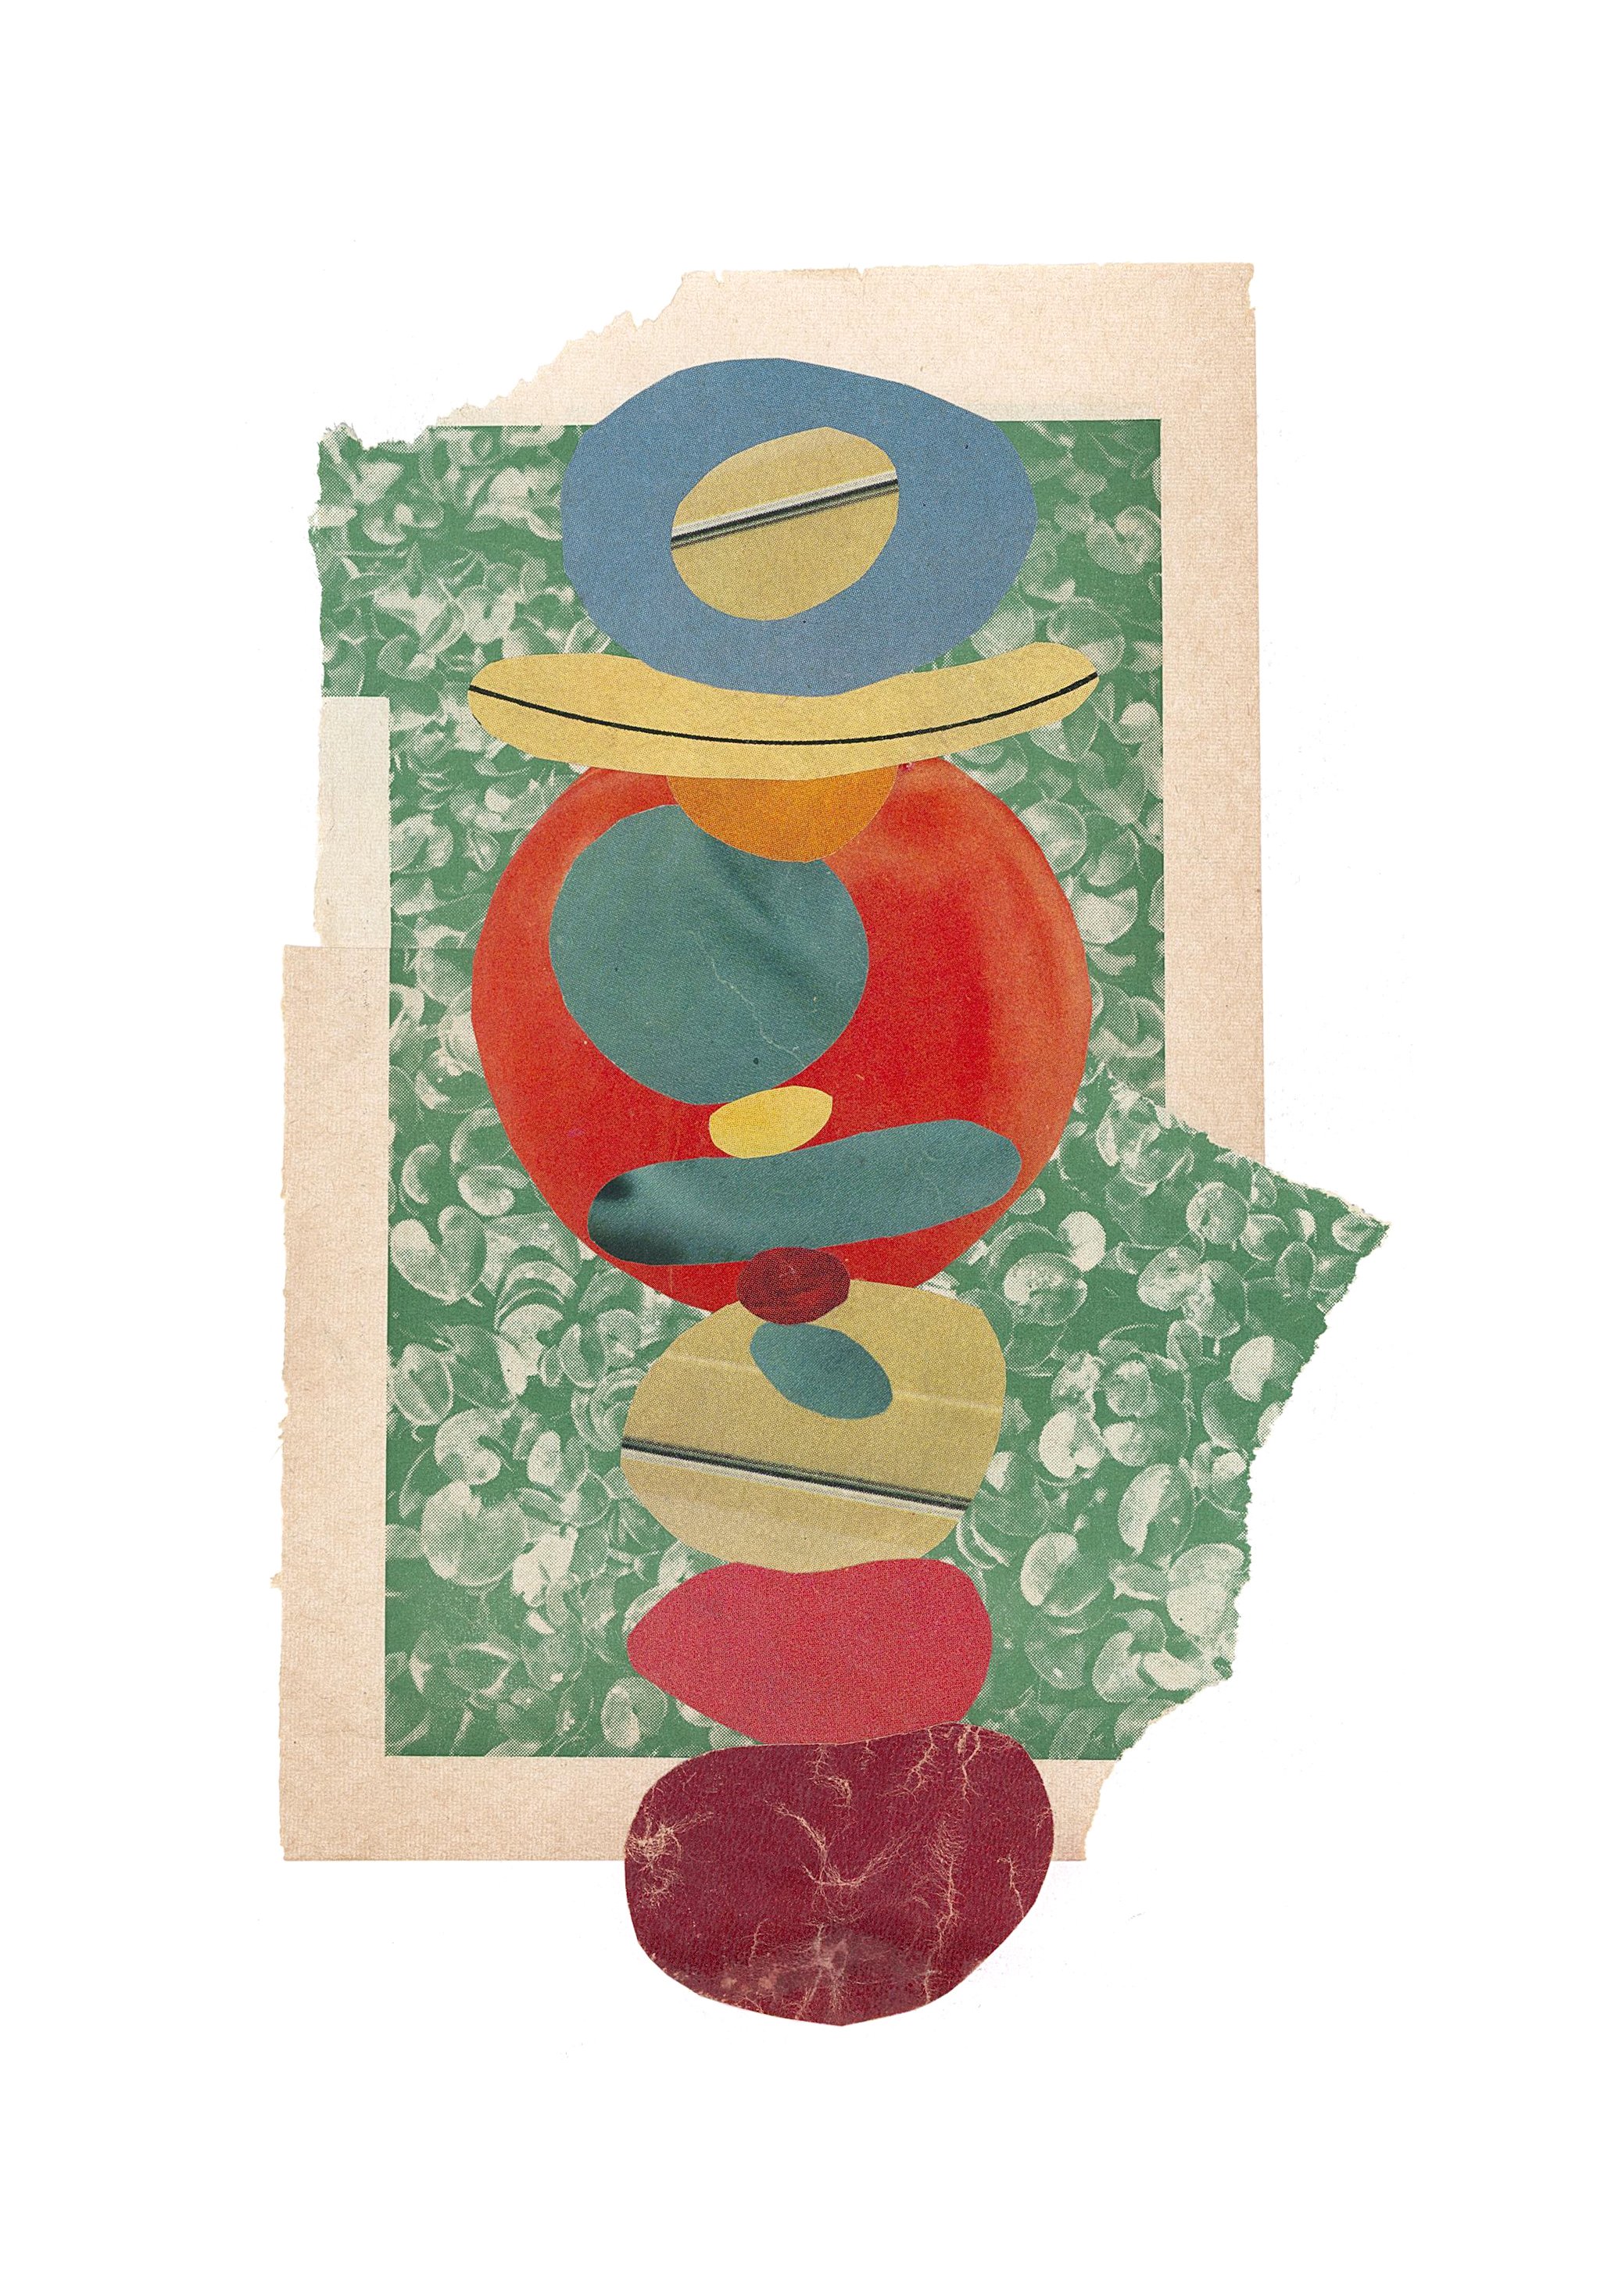 SS_COLLAGES_STACKING ROCKS.jpg